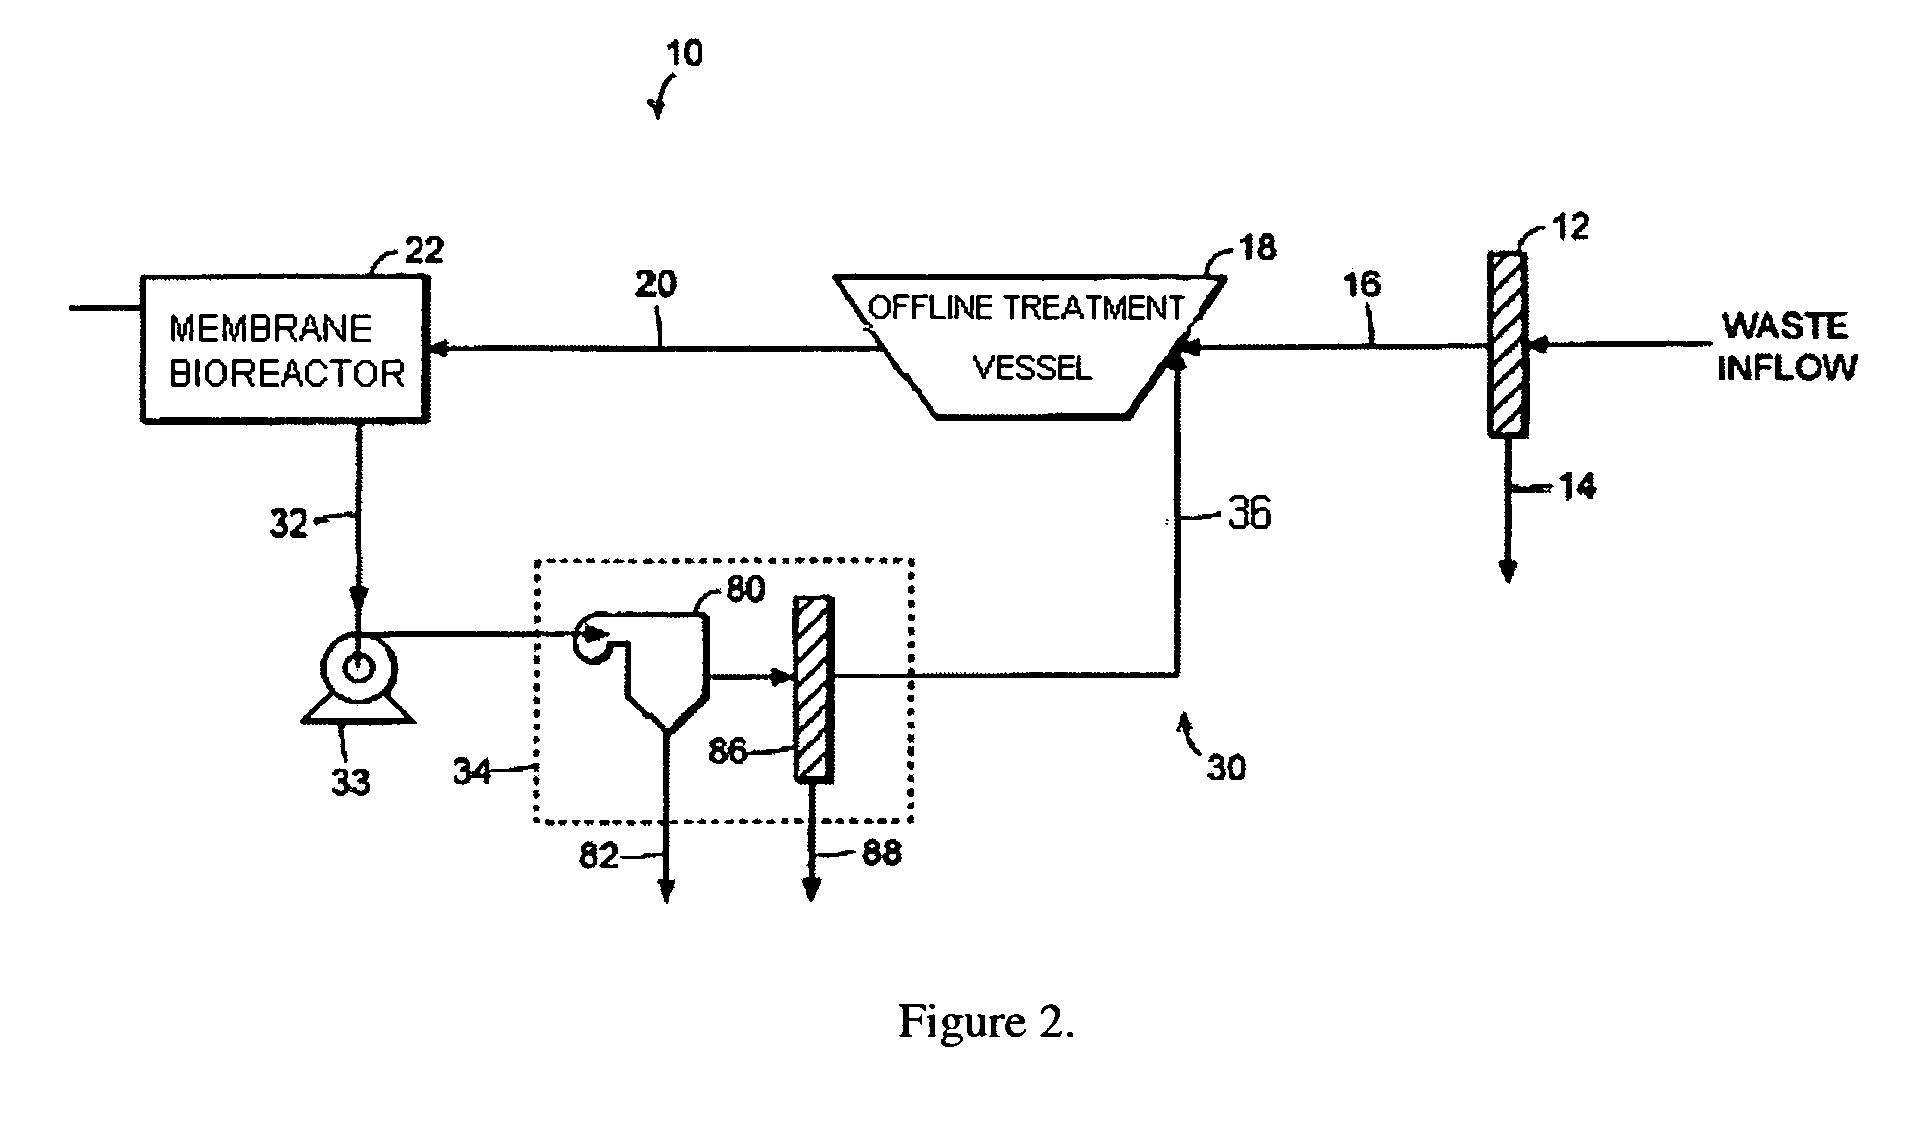 Grease and scum removal in a filtration apparatus comprising a membrane bioreactor and a treatment vessel for digesting organic materials